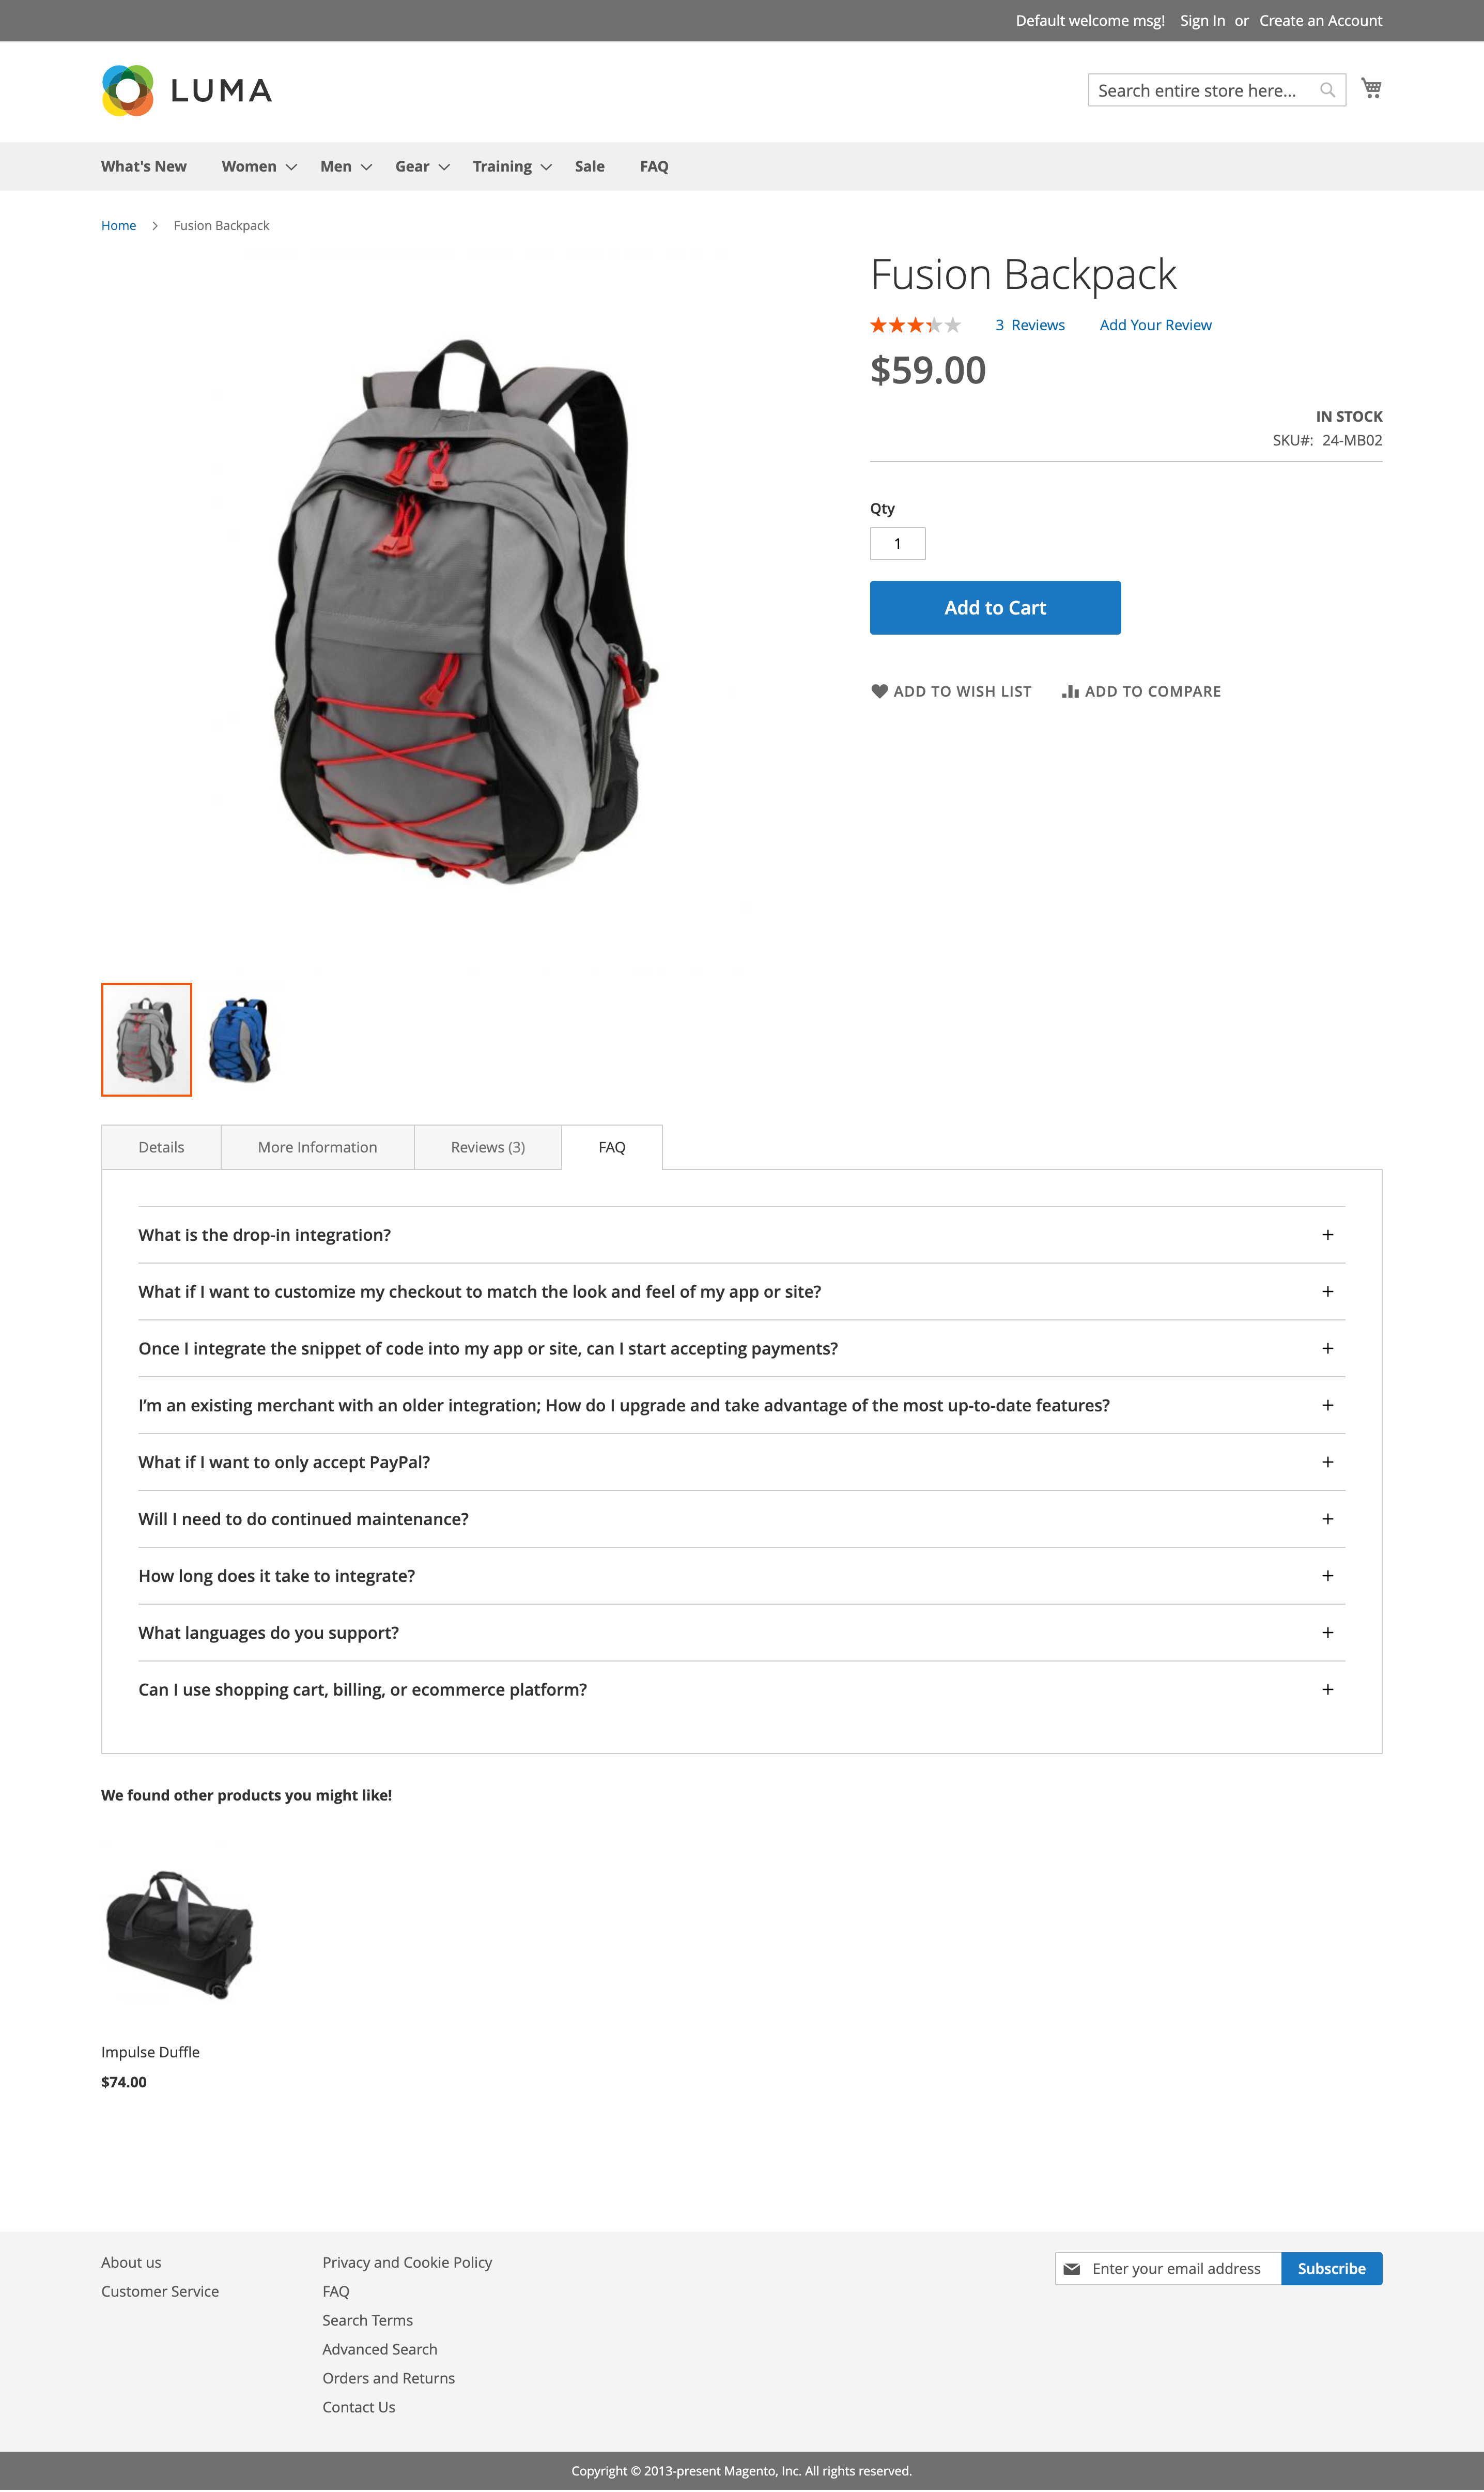 FAQ On Product Page